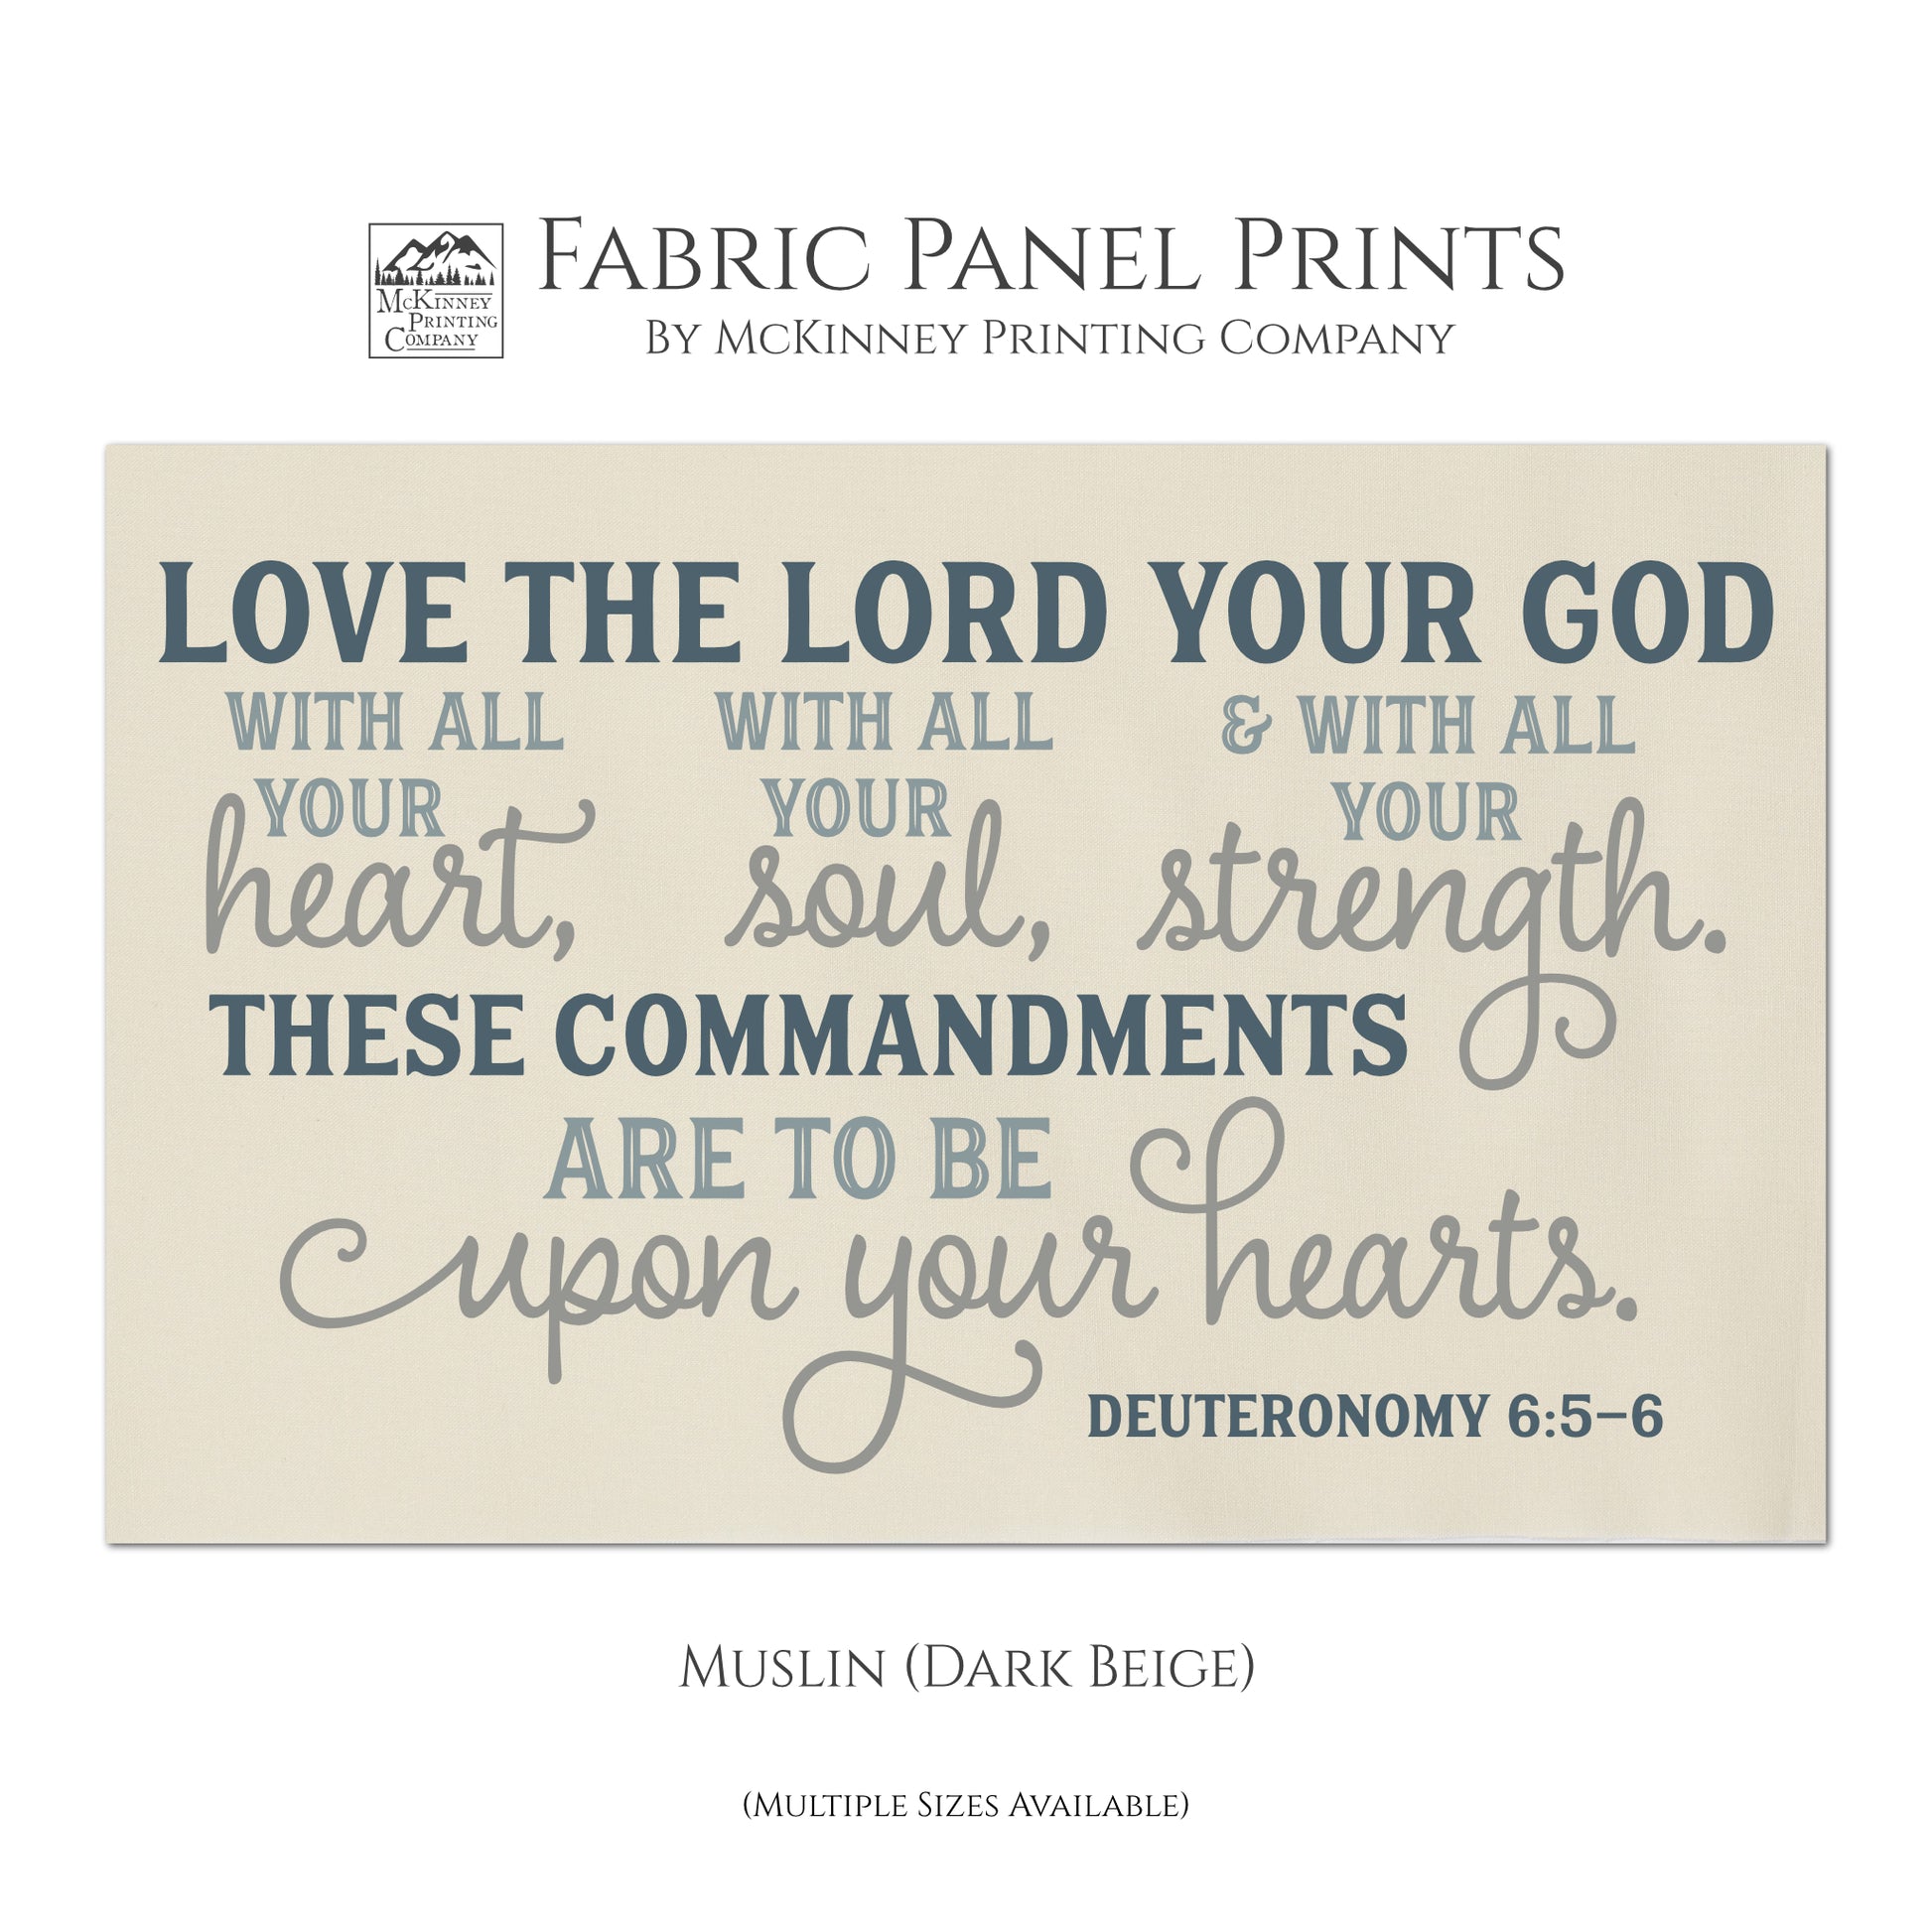 Love the Lord you God with all your heart, with all your soul and with all your strength. These commandments are to be written upon your hearts - Deuteronomy 6:5 - Scripture Fabric, Christian, Bible Verse, Quilting, Quilt - Muslin